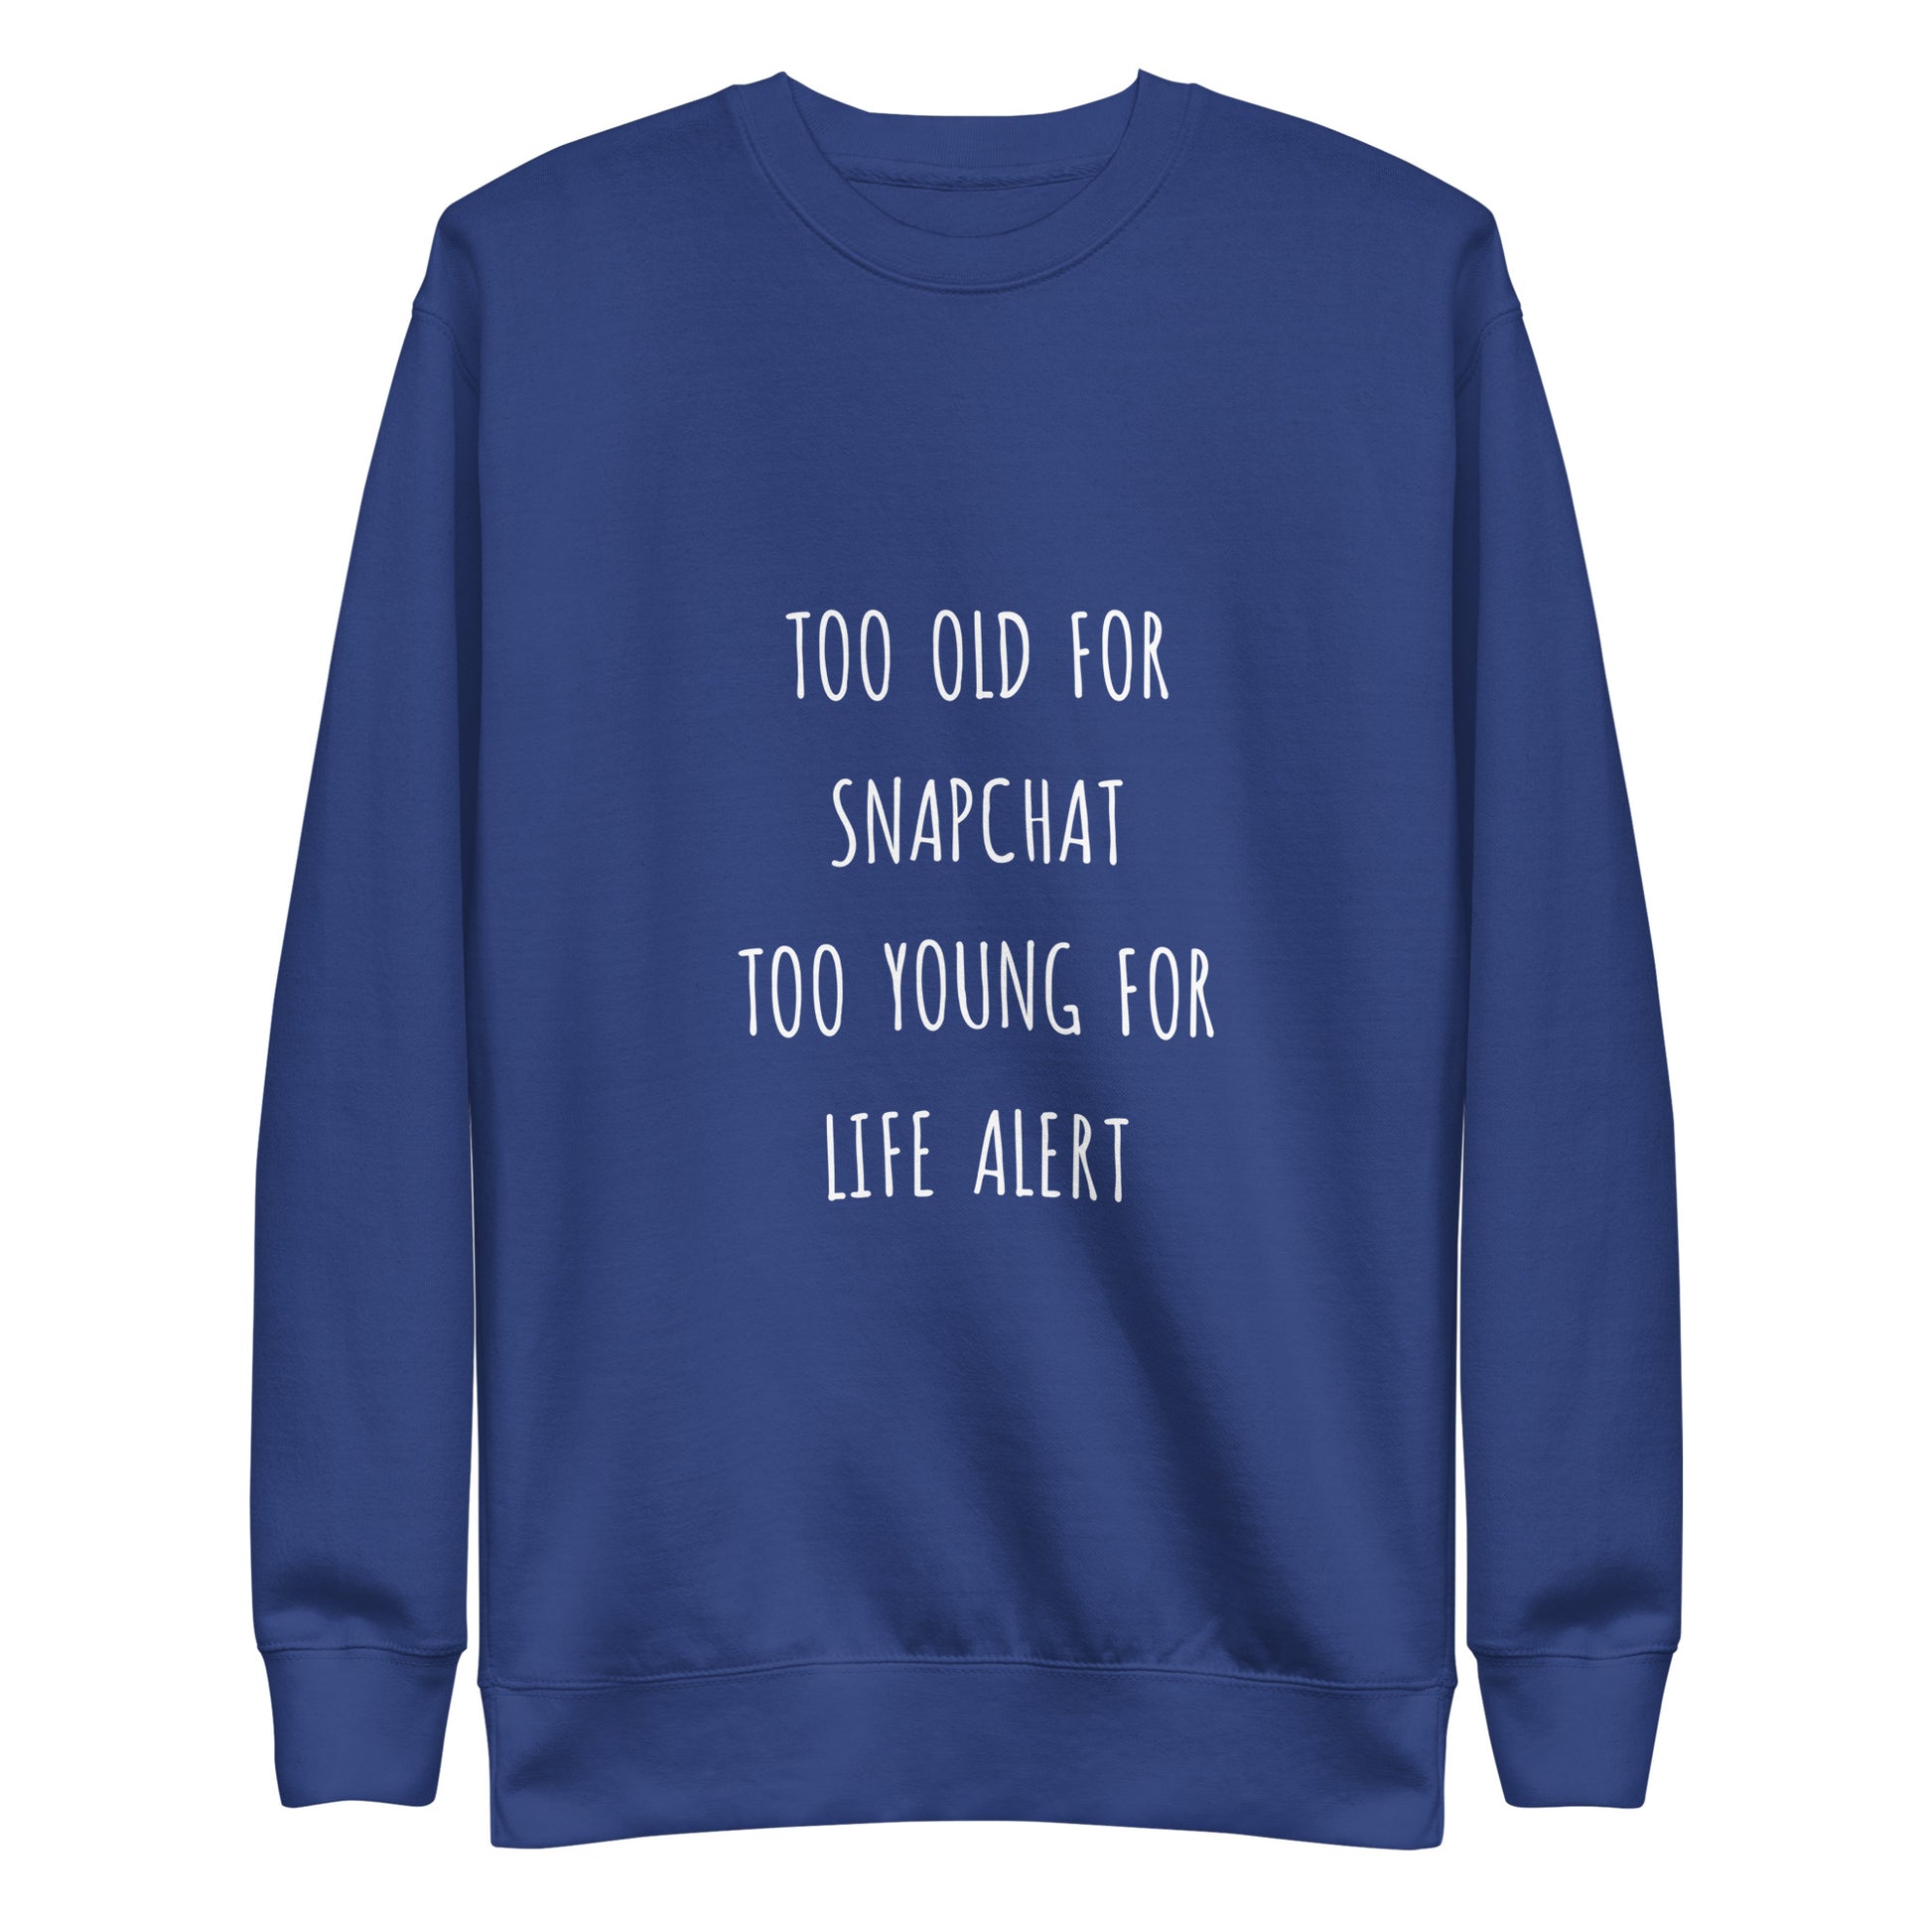 Too Old for Snapchat Too Young for Life Alert Sweatshirt | Art in Aging